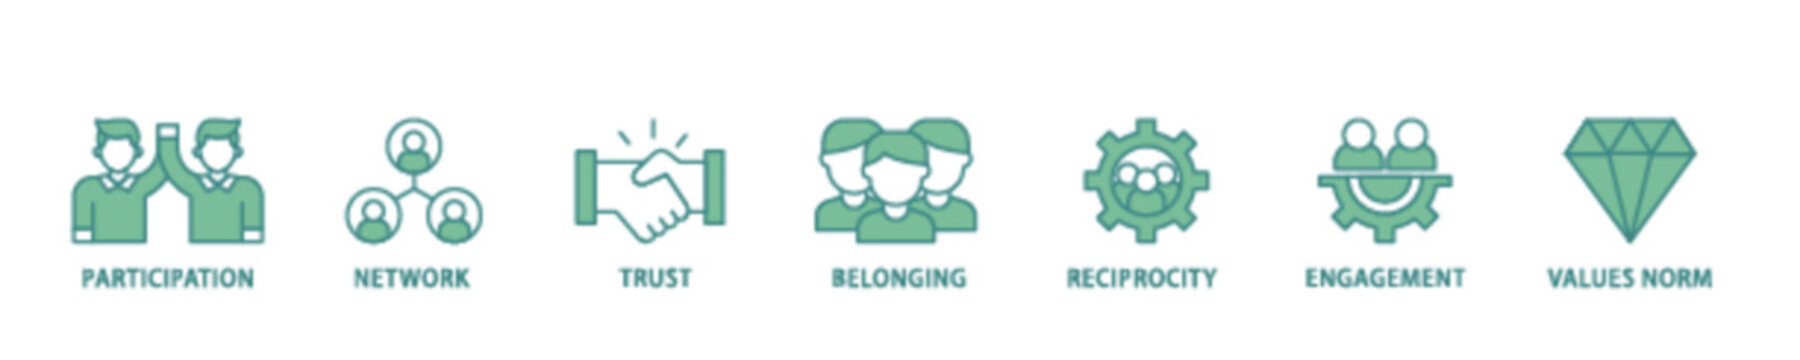 Social capital icon set flow process illustrationwhich consists of participation, network, trust, belonging, reciprocity, engagement, and values norm icon live stroke and easy to edit 